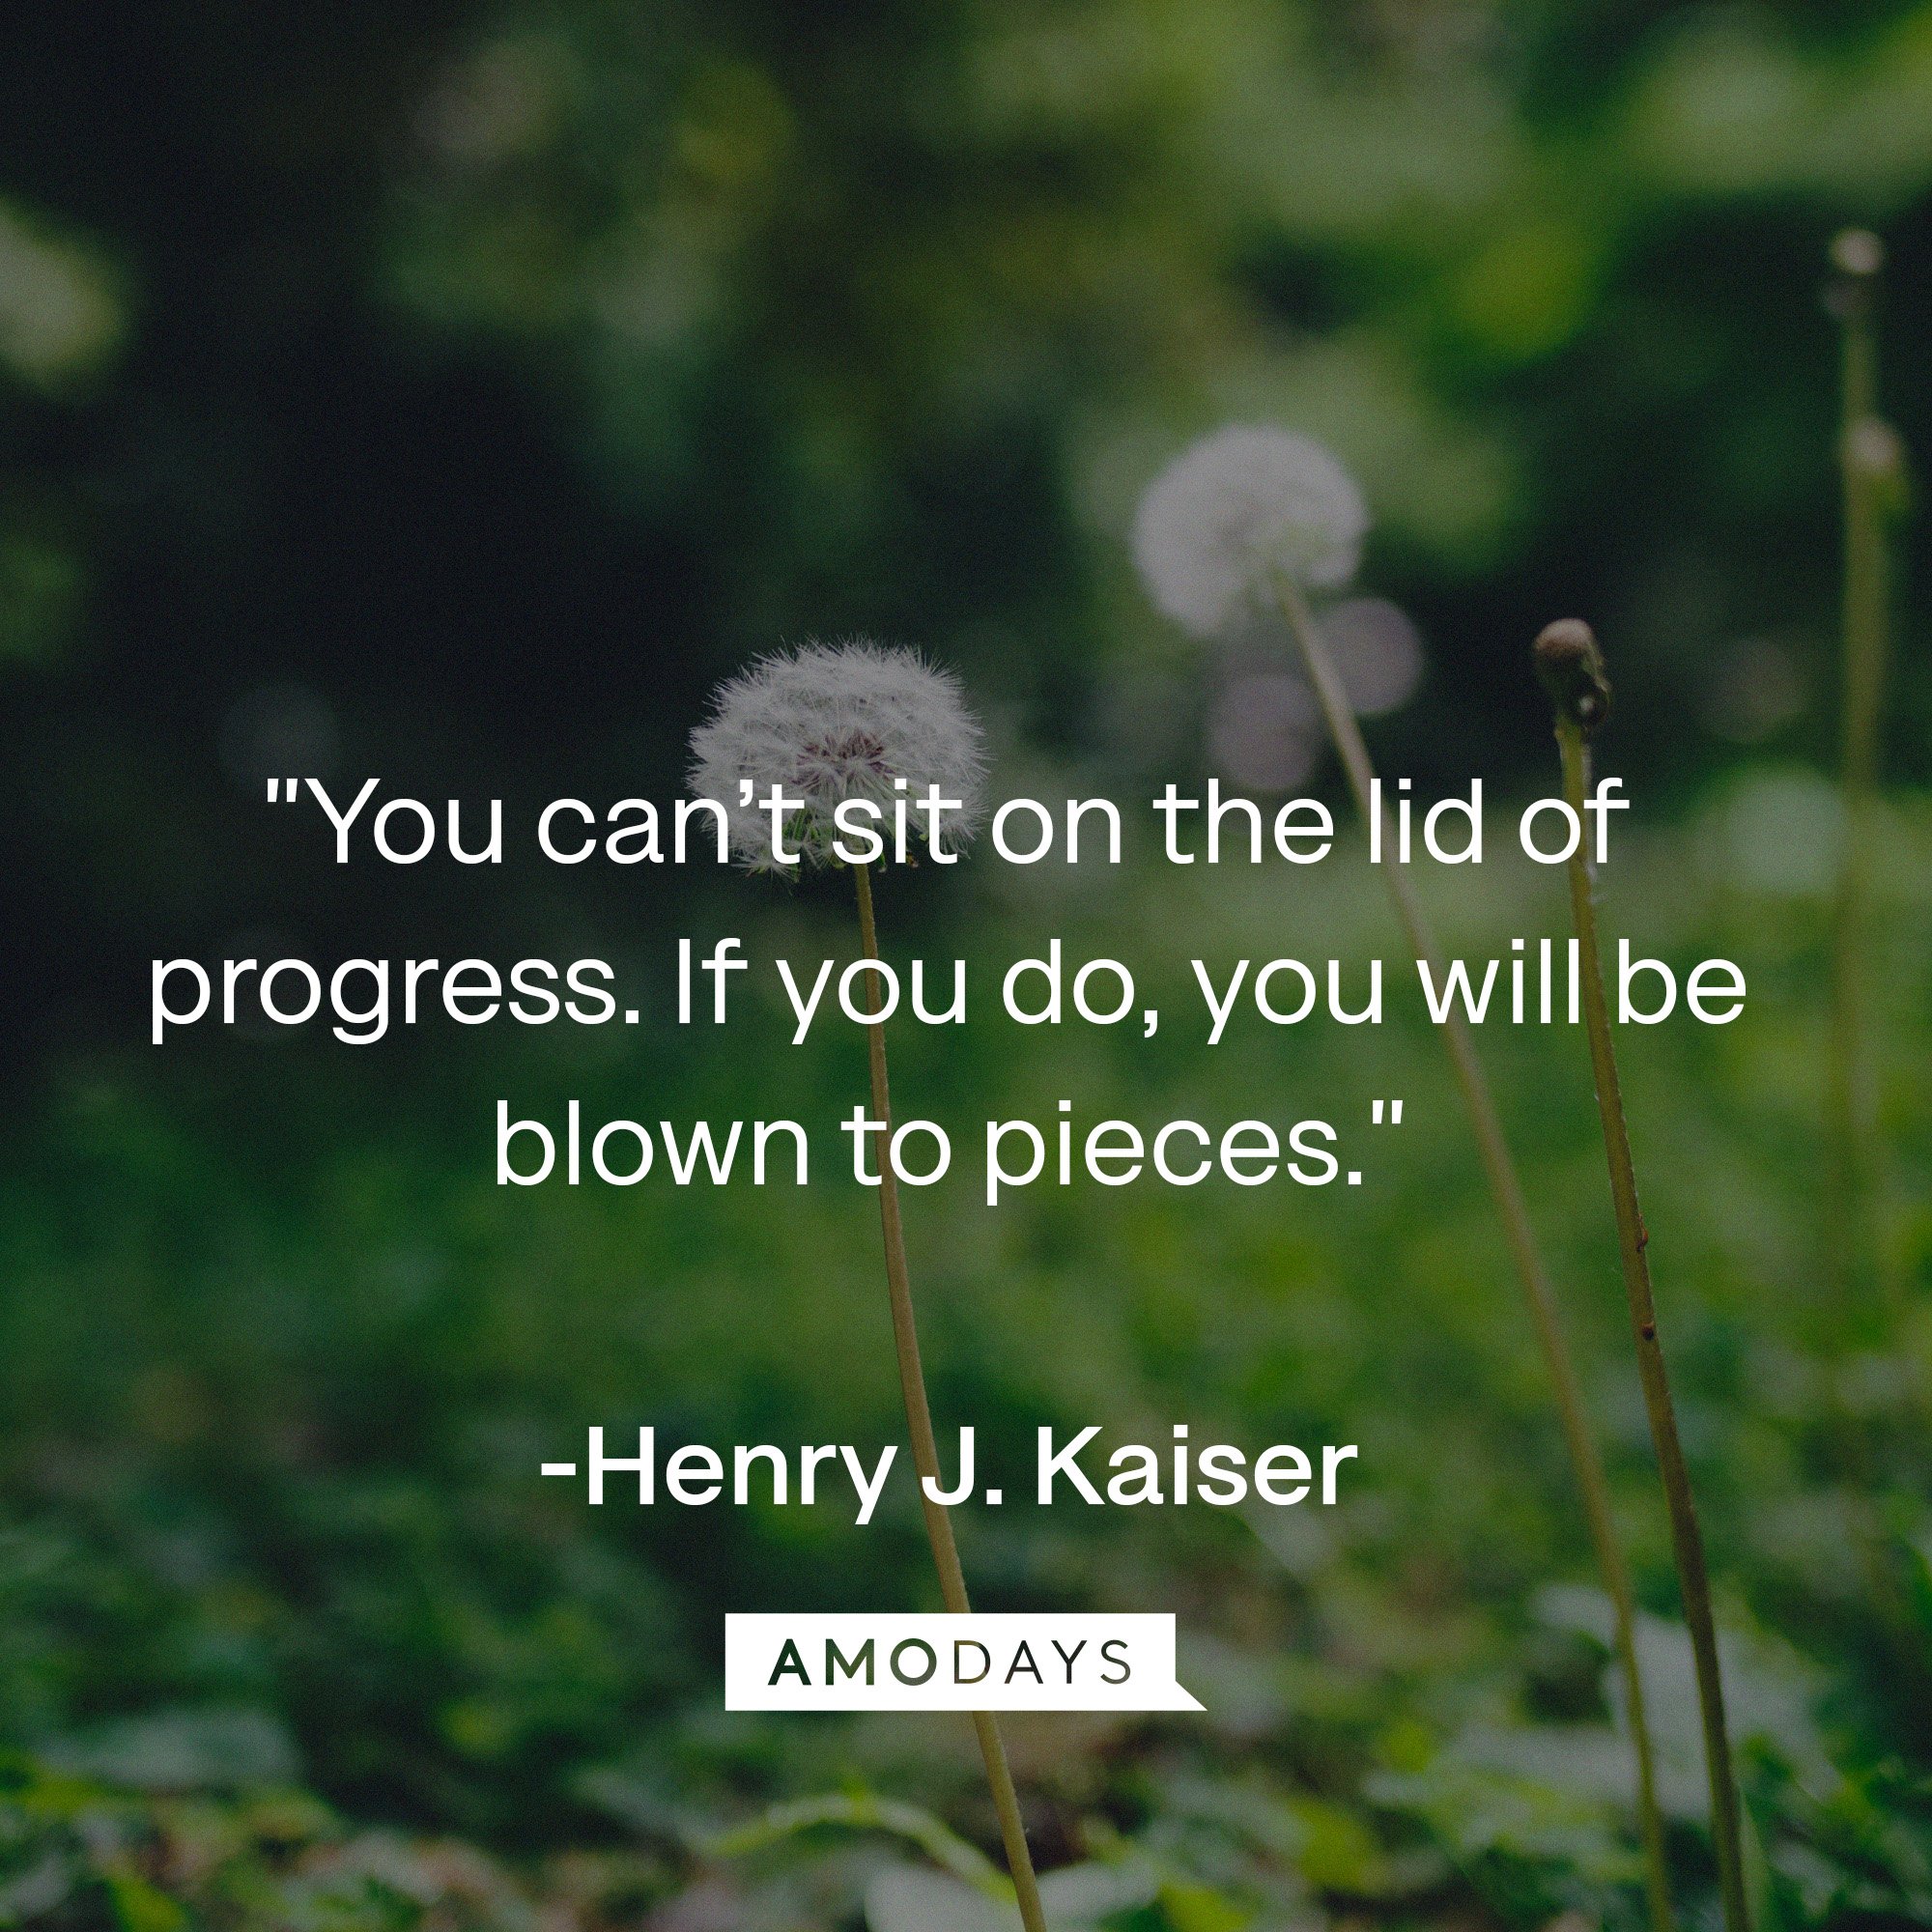 Henry J. Kaiser's quote: "You can't sit on the lid of progress. If you do, you will be blown to pieces."  | Image: AmoDays